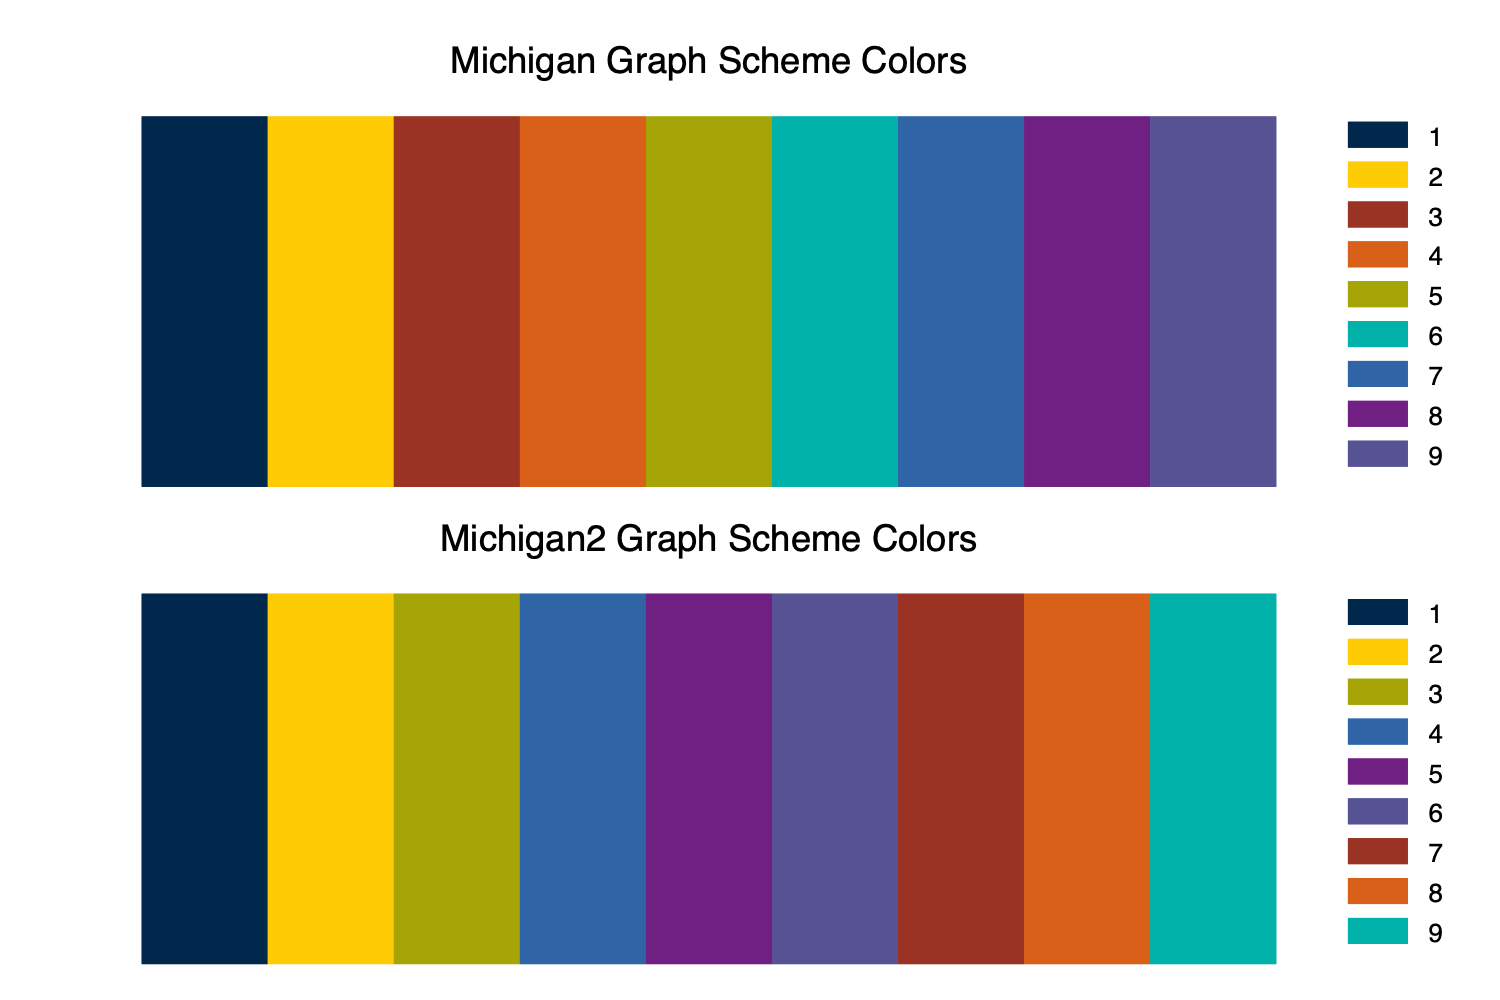 Colors in Michigan Graph Schemes